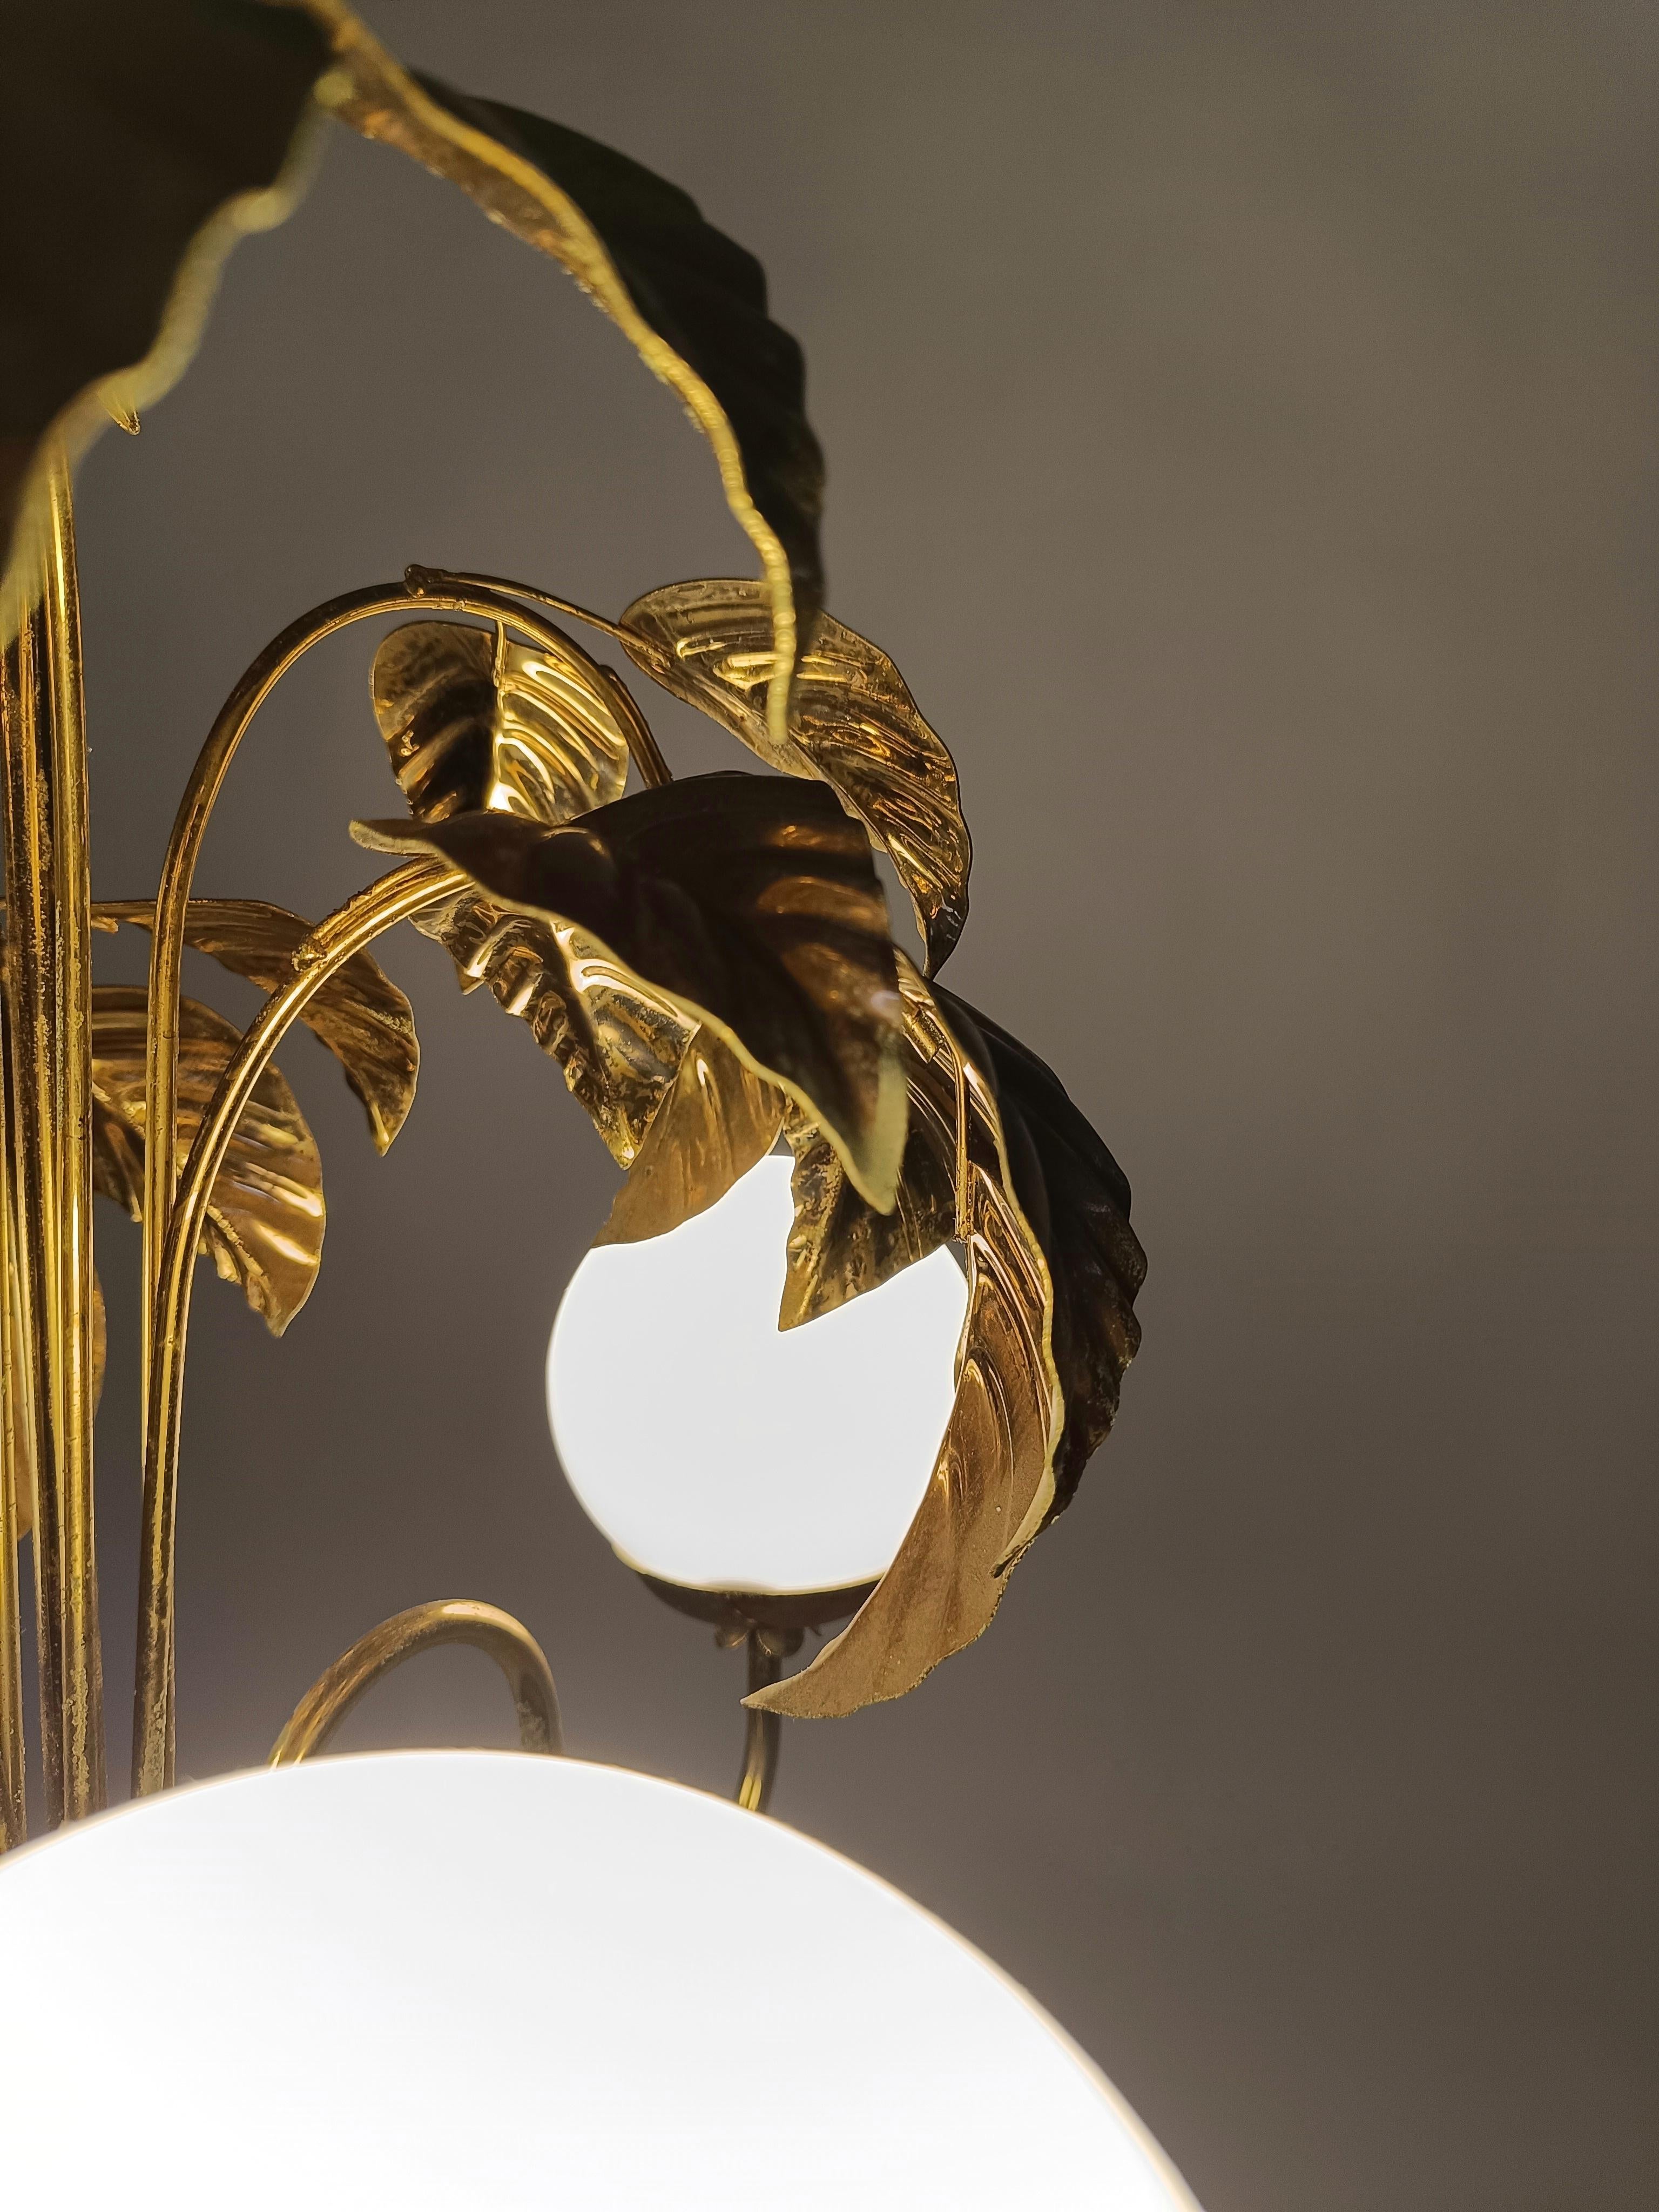 A chandelier made in Italy between the 60s and 70s, elegant and very decorative with their leaf motif that climbs the wall like a pothos plant.

The leafy and gilded decorative element had great success during the 70s, designers and furniture